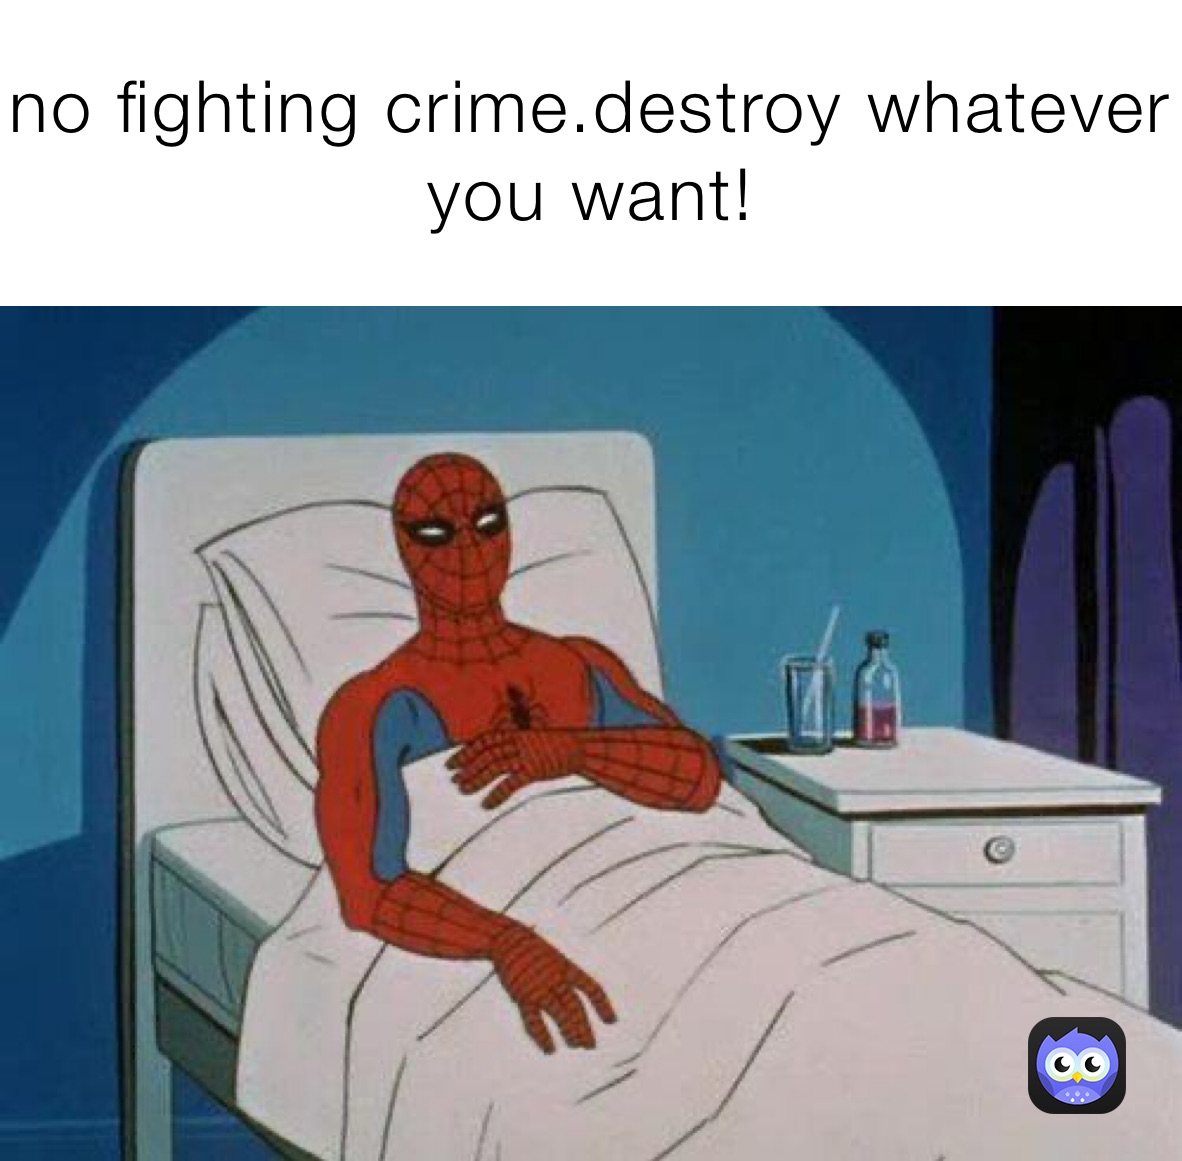 no fighting crime.destroy whatever you want!